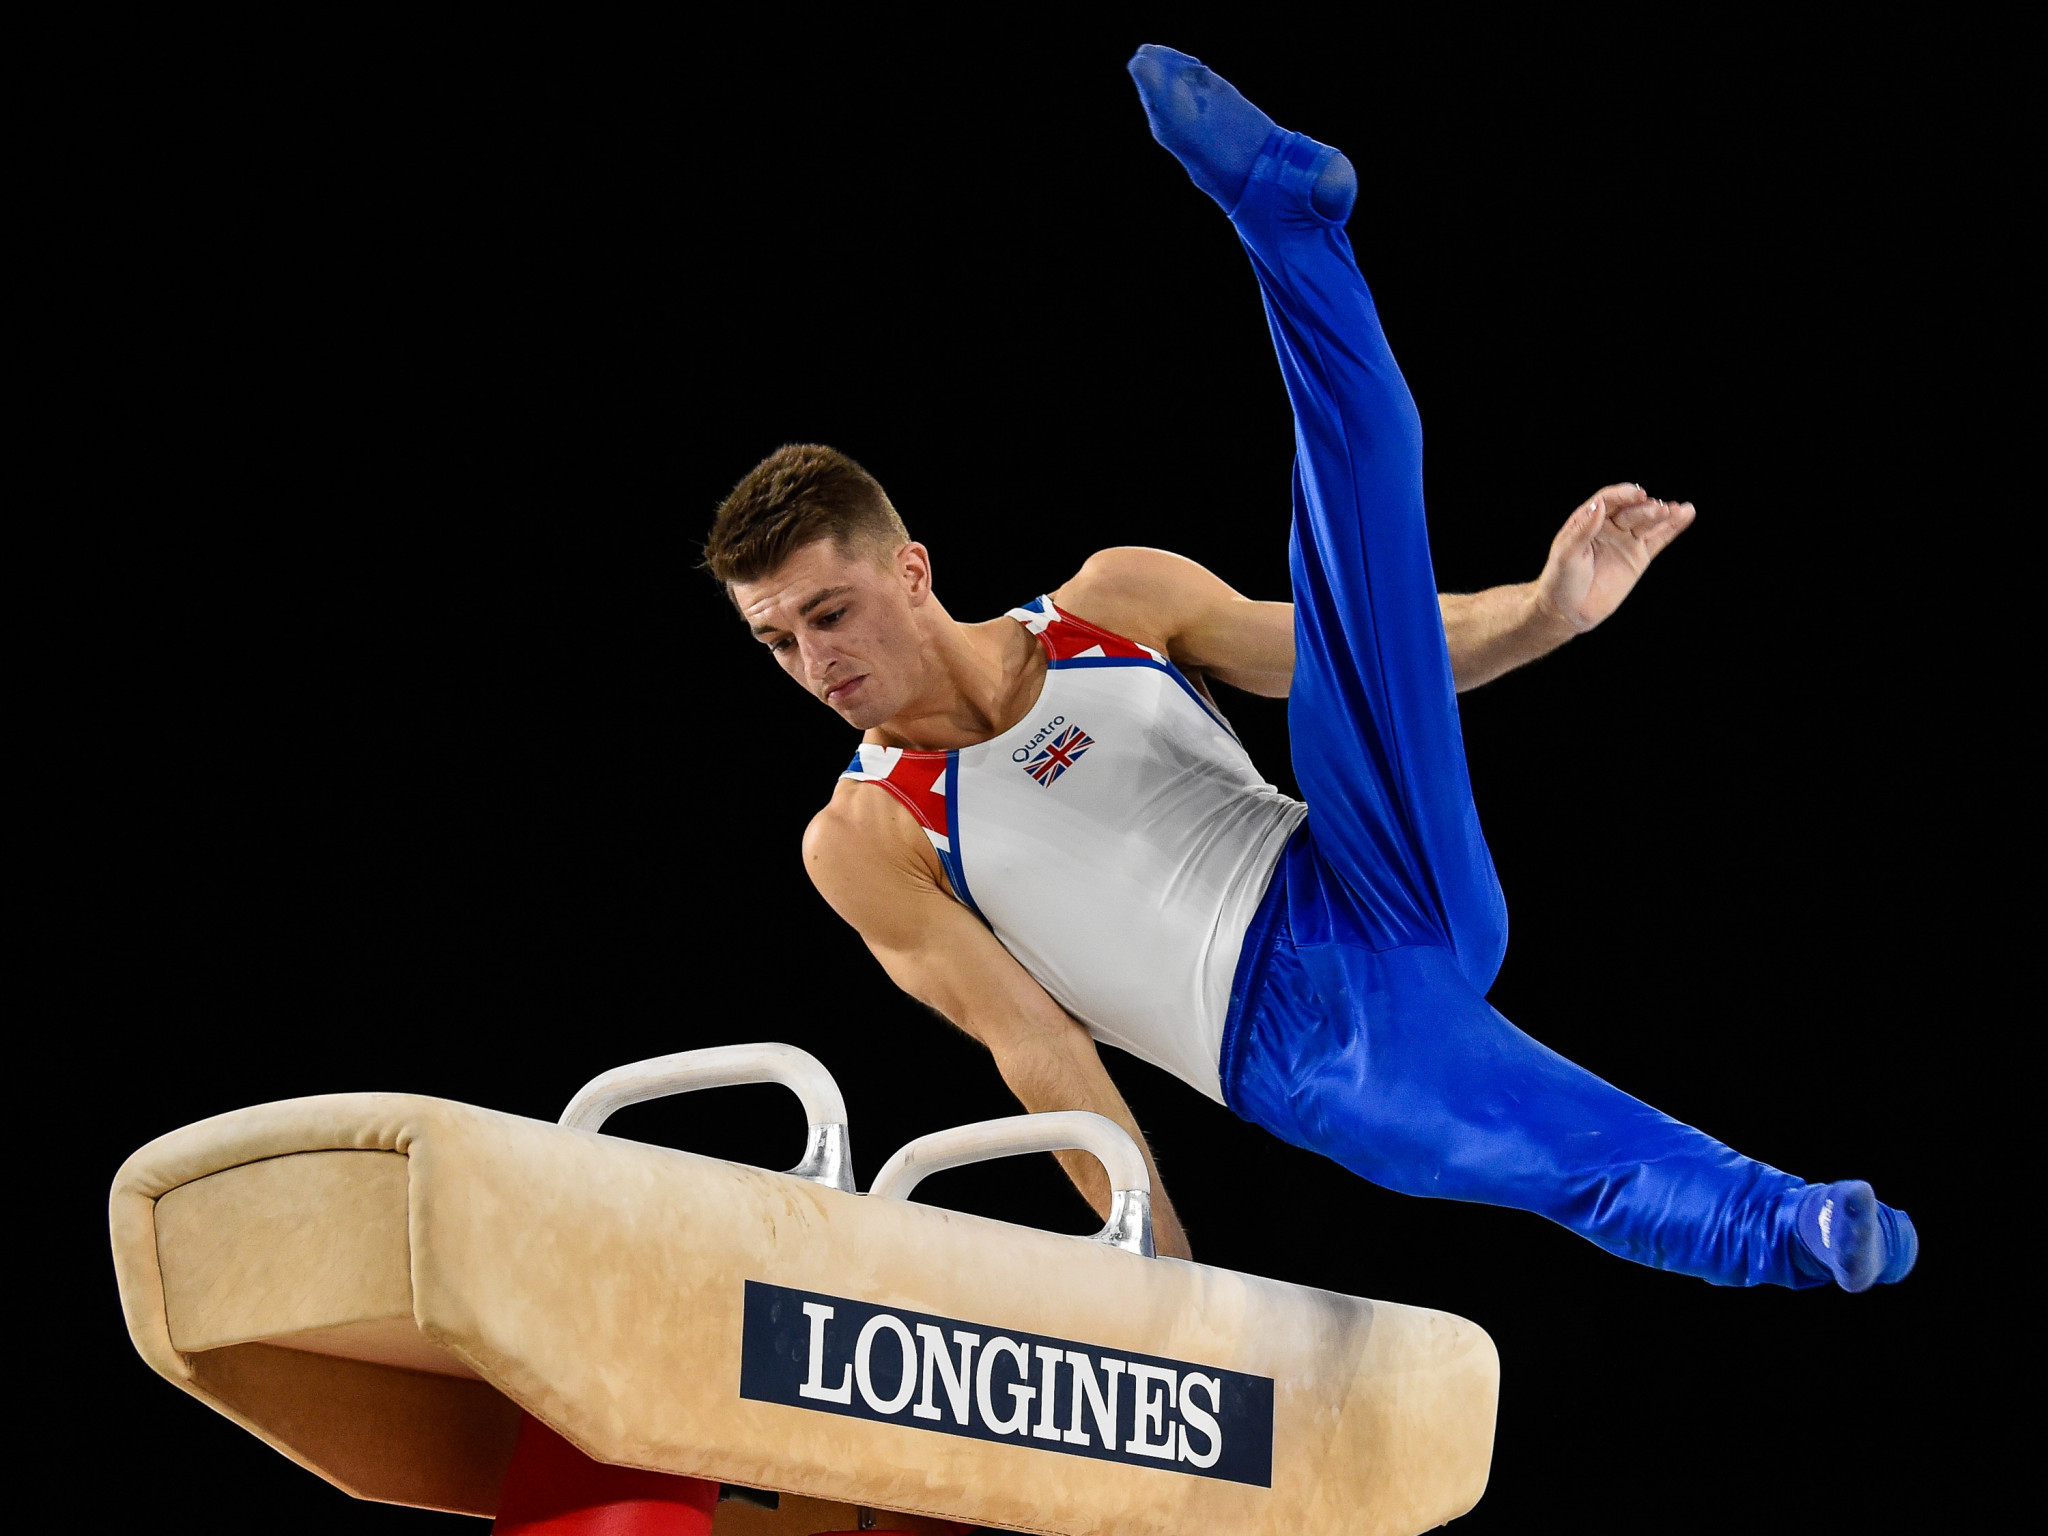 Whitlock and Fragapane named in 10-strong England gymnastics team for Gold Coast 2018